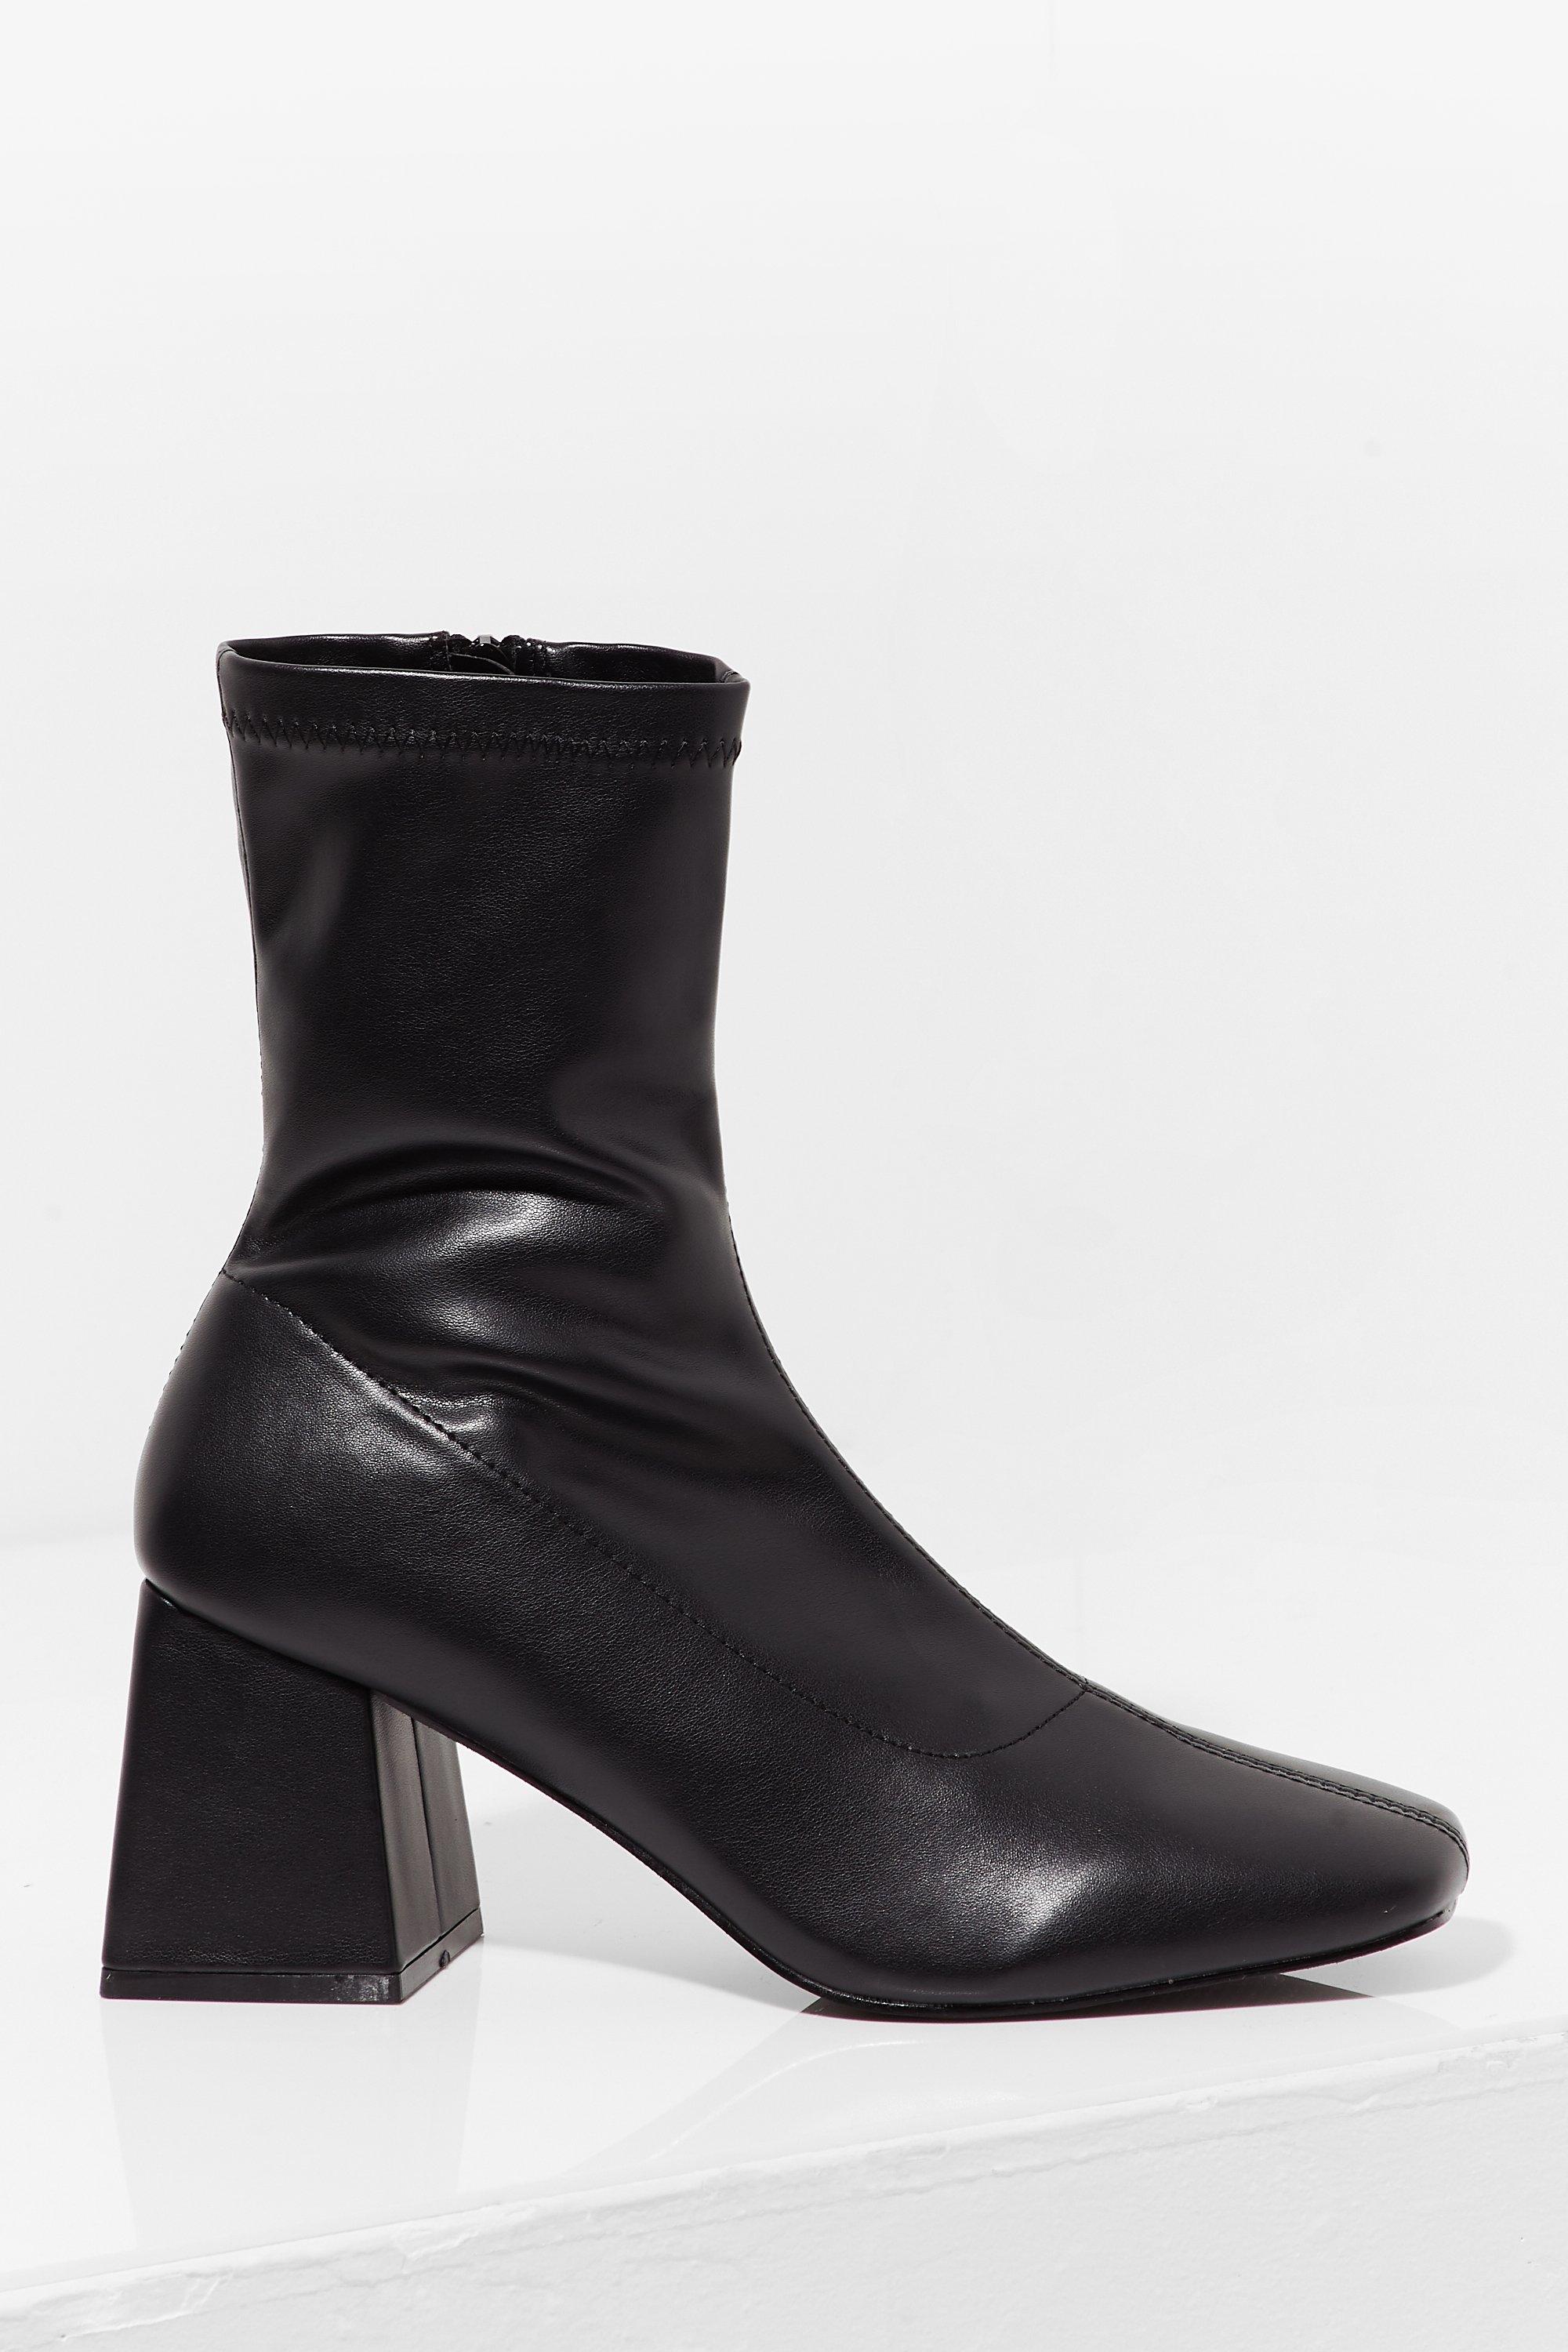 black faux leather heeled boots